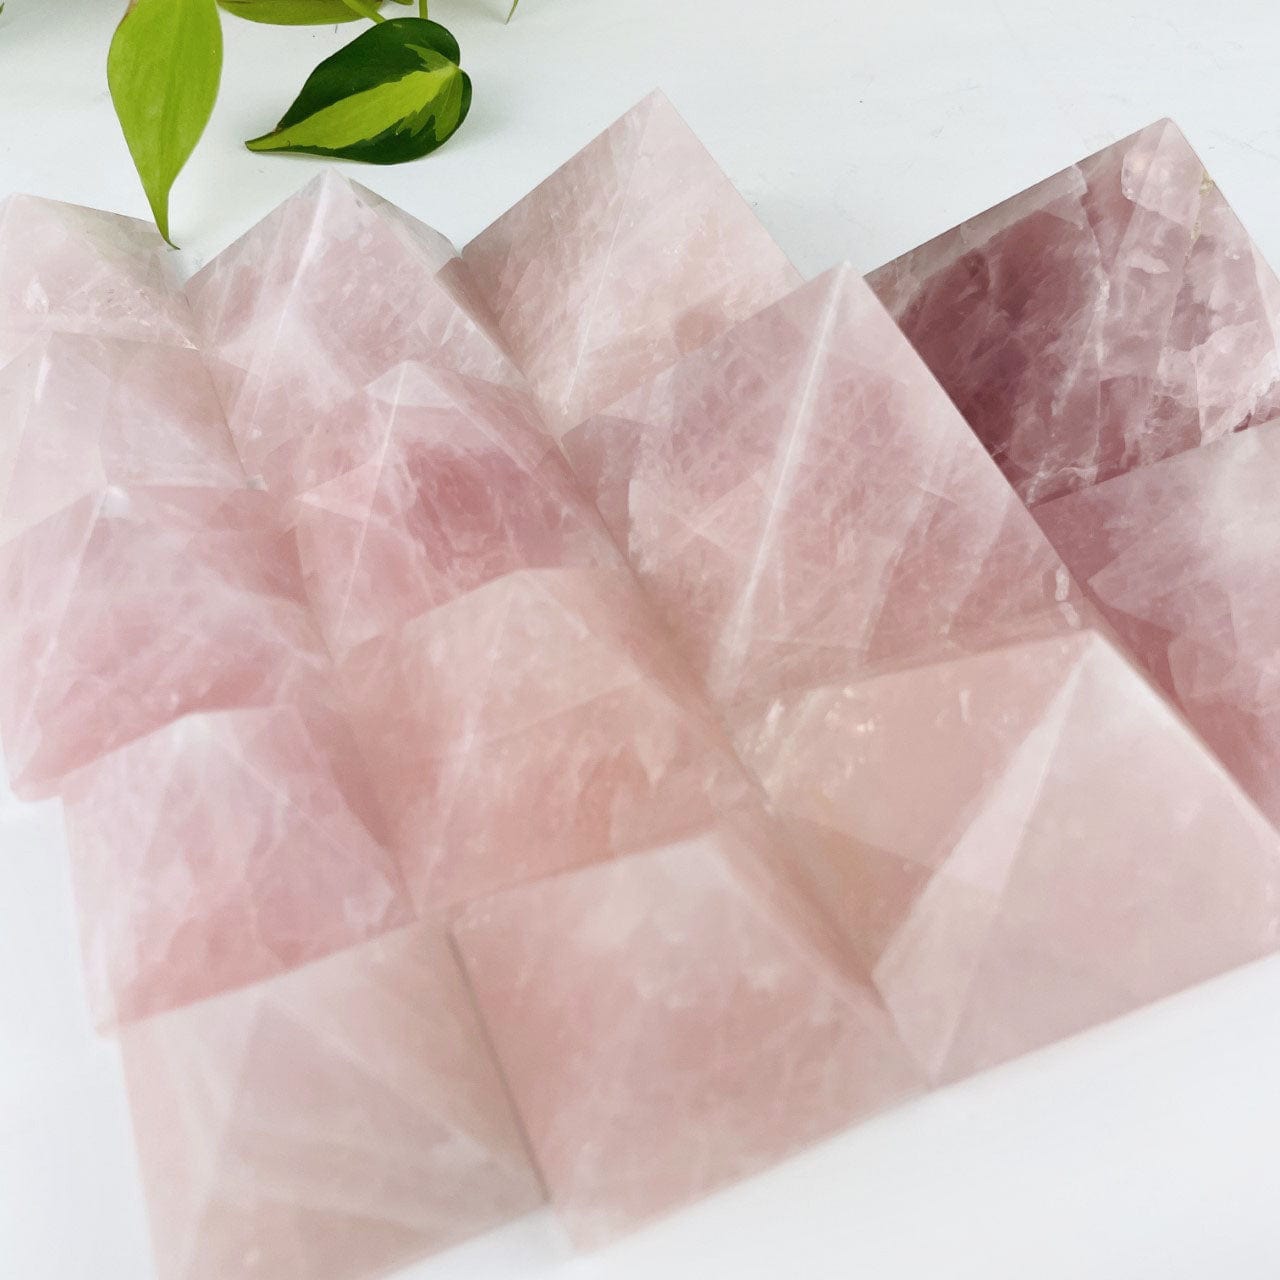 Rose Quartz Pyramids next to each otherin various sizes, showing the shades of rose available in this stock